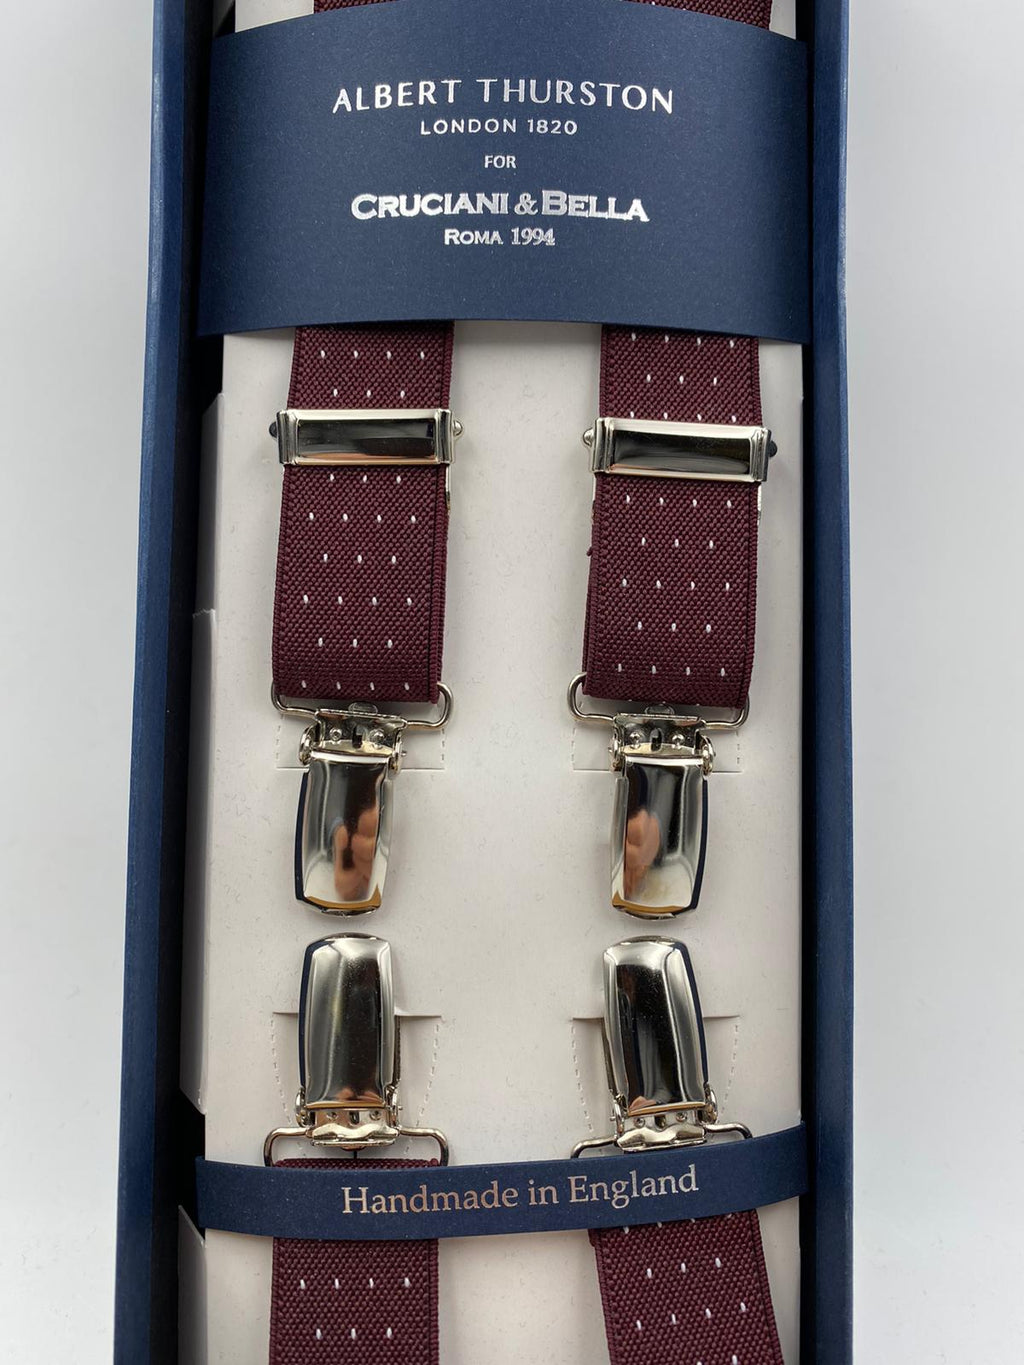 Albert Thurston for Cruciani & Bella Made in England Clip on Adjustable Sizing 25 mm elastic braces Bourgundy whit White Dots X-Shaped Nickel Fittings Size: L #4835